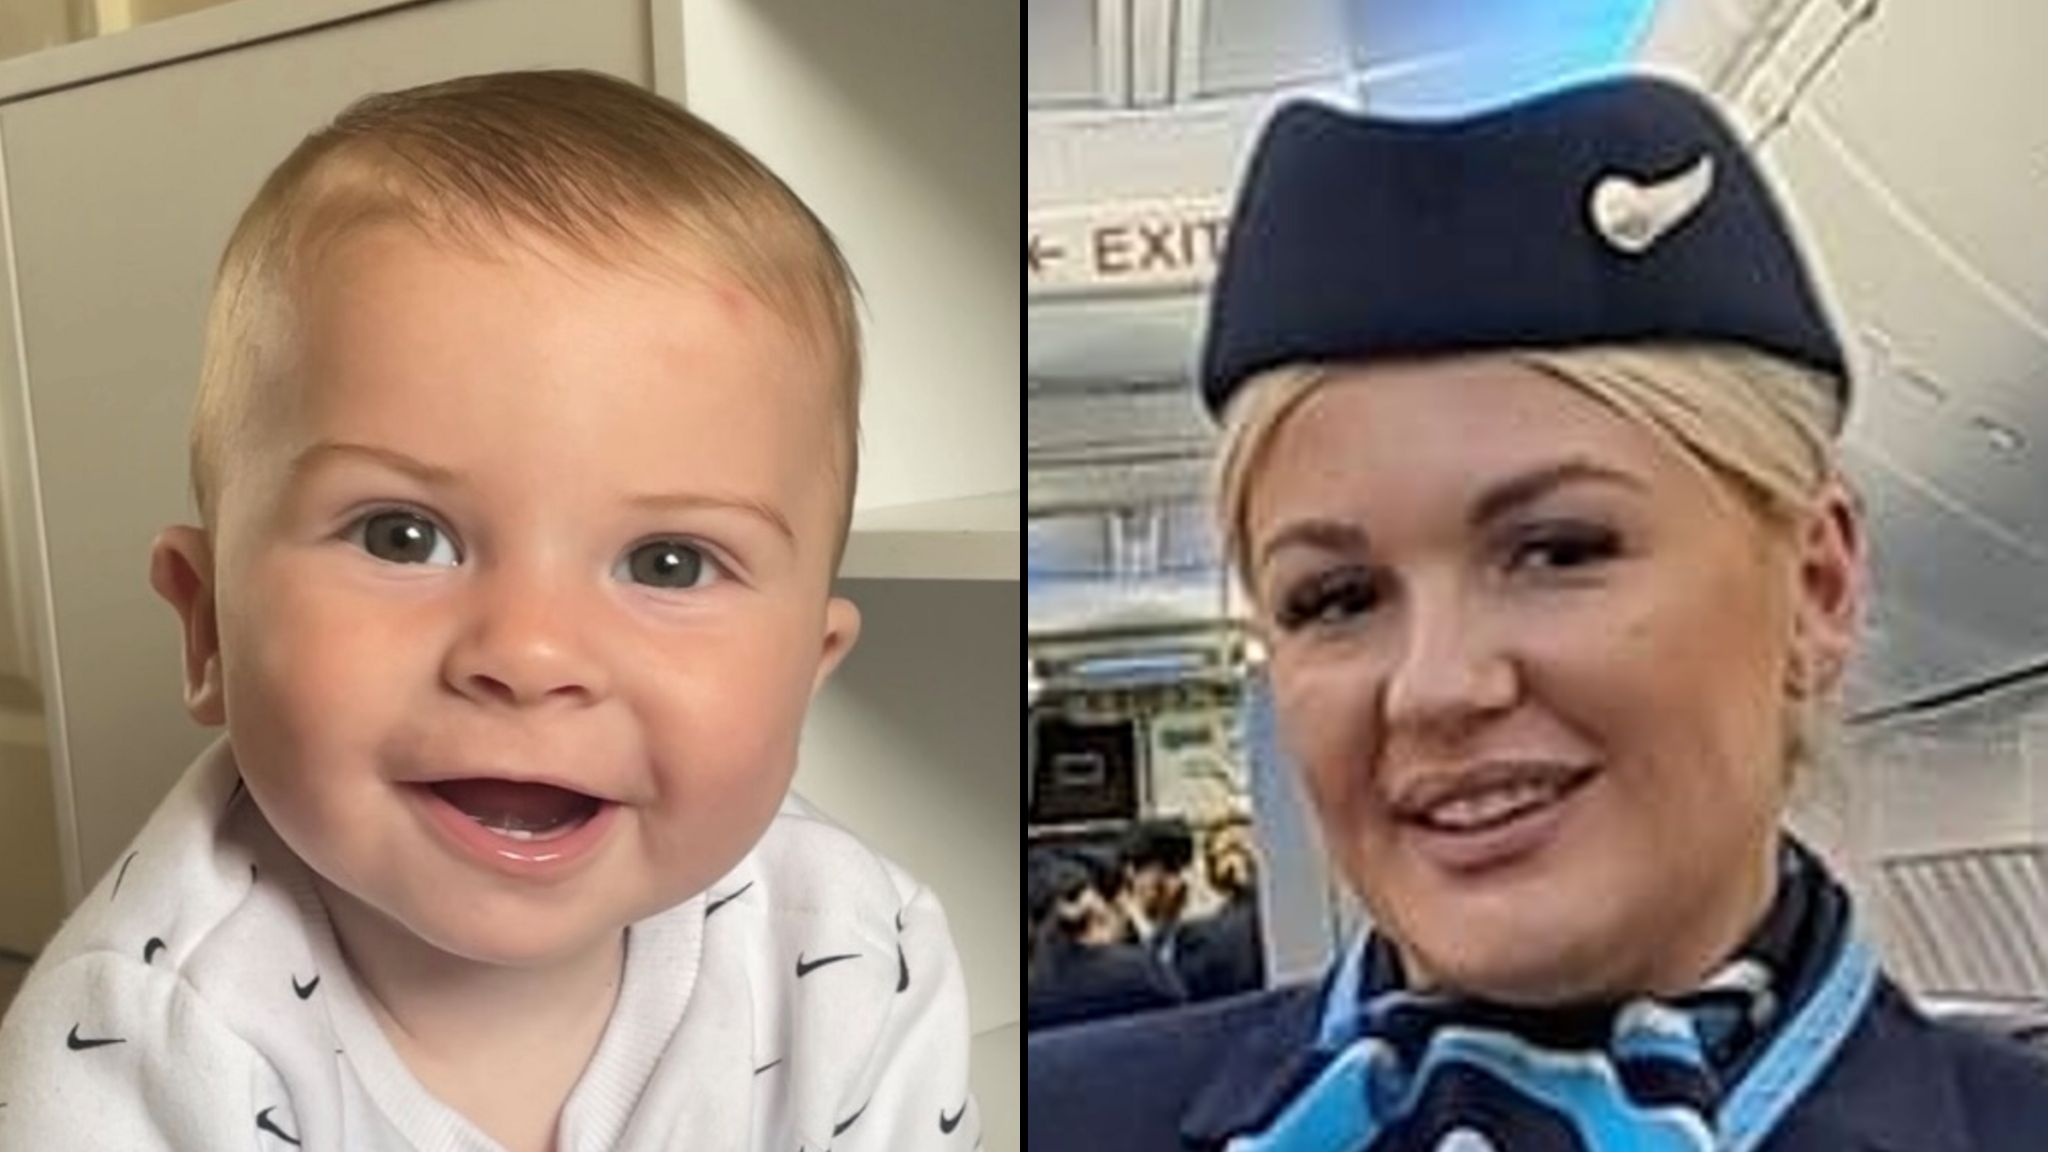 A composite, on the left is a young boy with fair hair smiling at the camera, on the right is a woman with blonde hair in a navy airline uniform hat, jacket and scarf looking at the camera. 